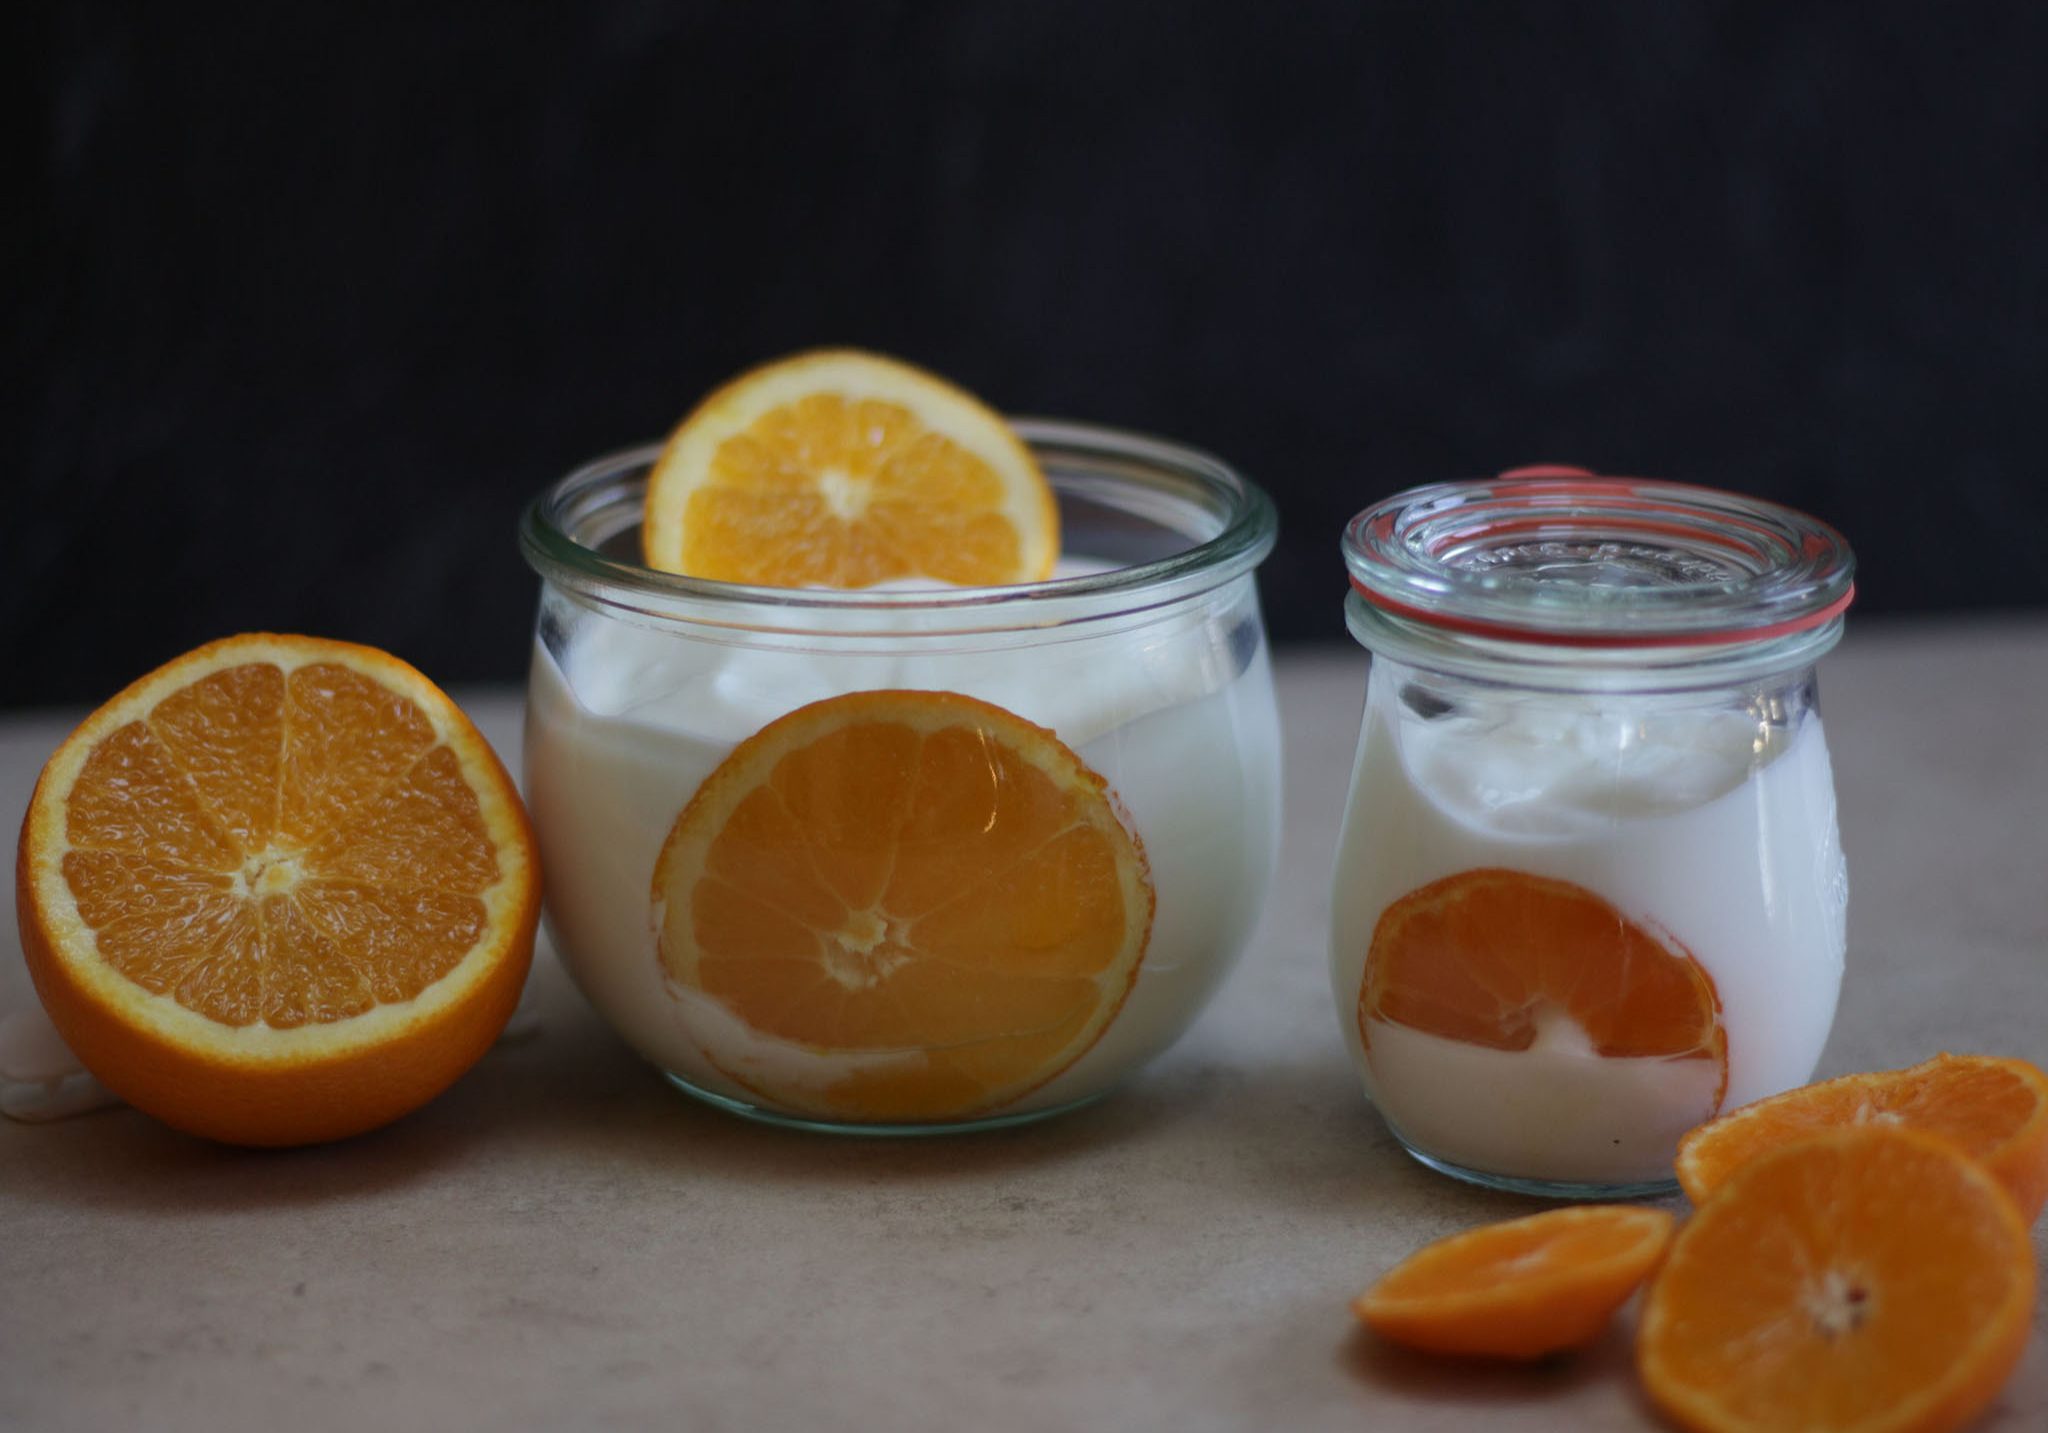 Kefir Second Fermented with Oranges